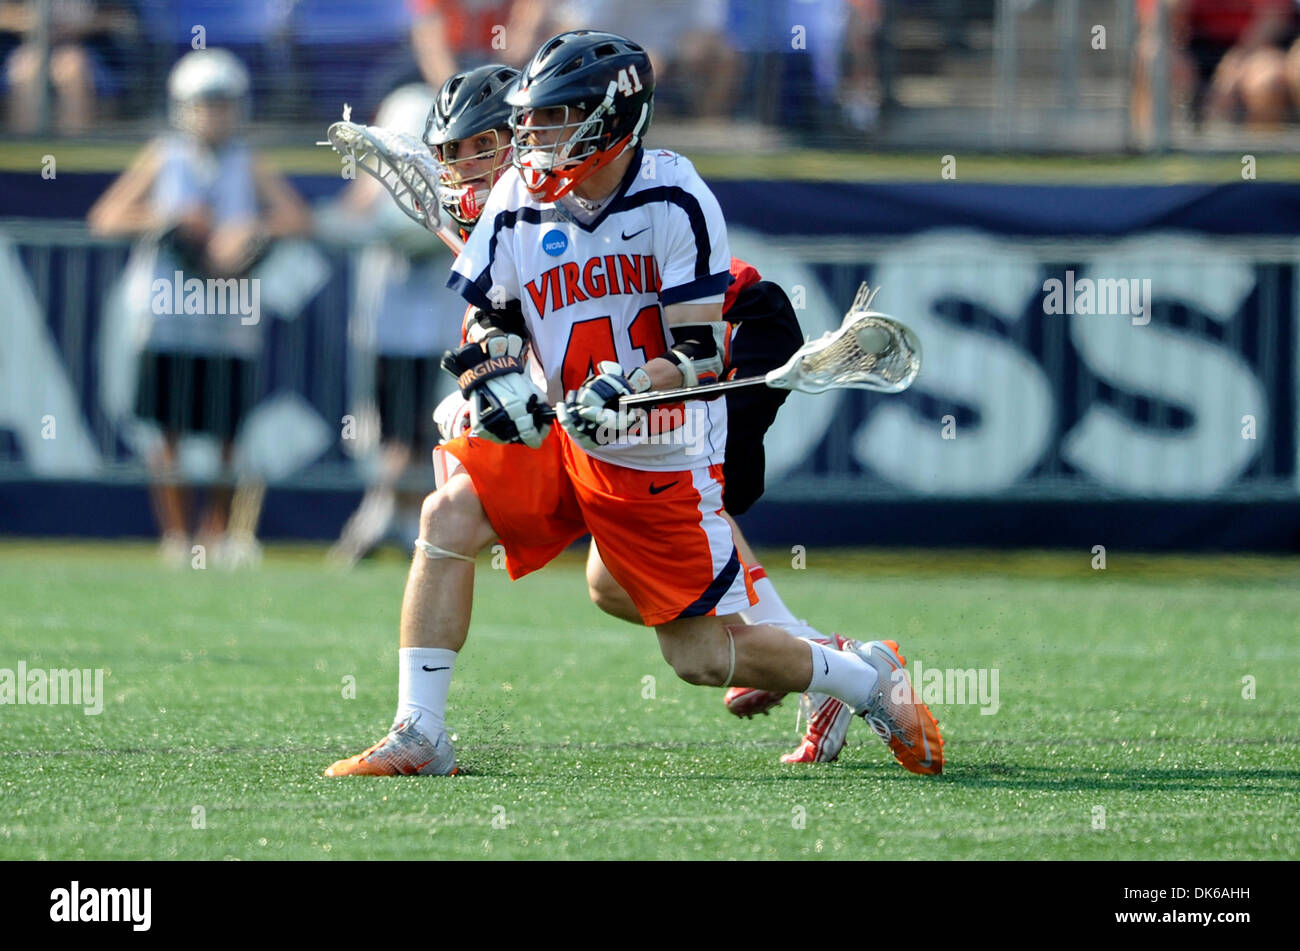 2011 NCAA Lacrosse National Championship: Virginia Wins Fifth Title, 9-7  Over Maryland 